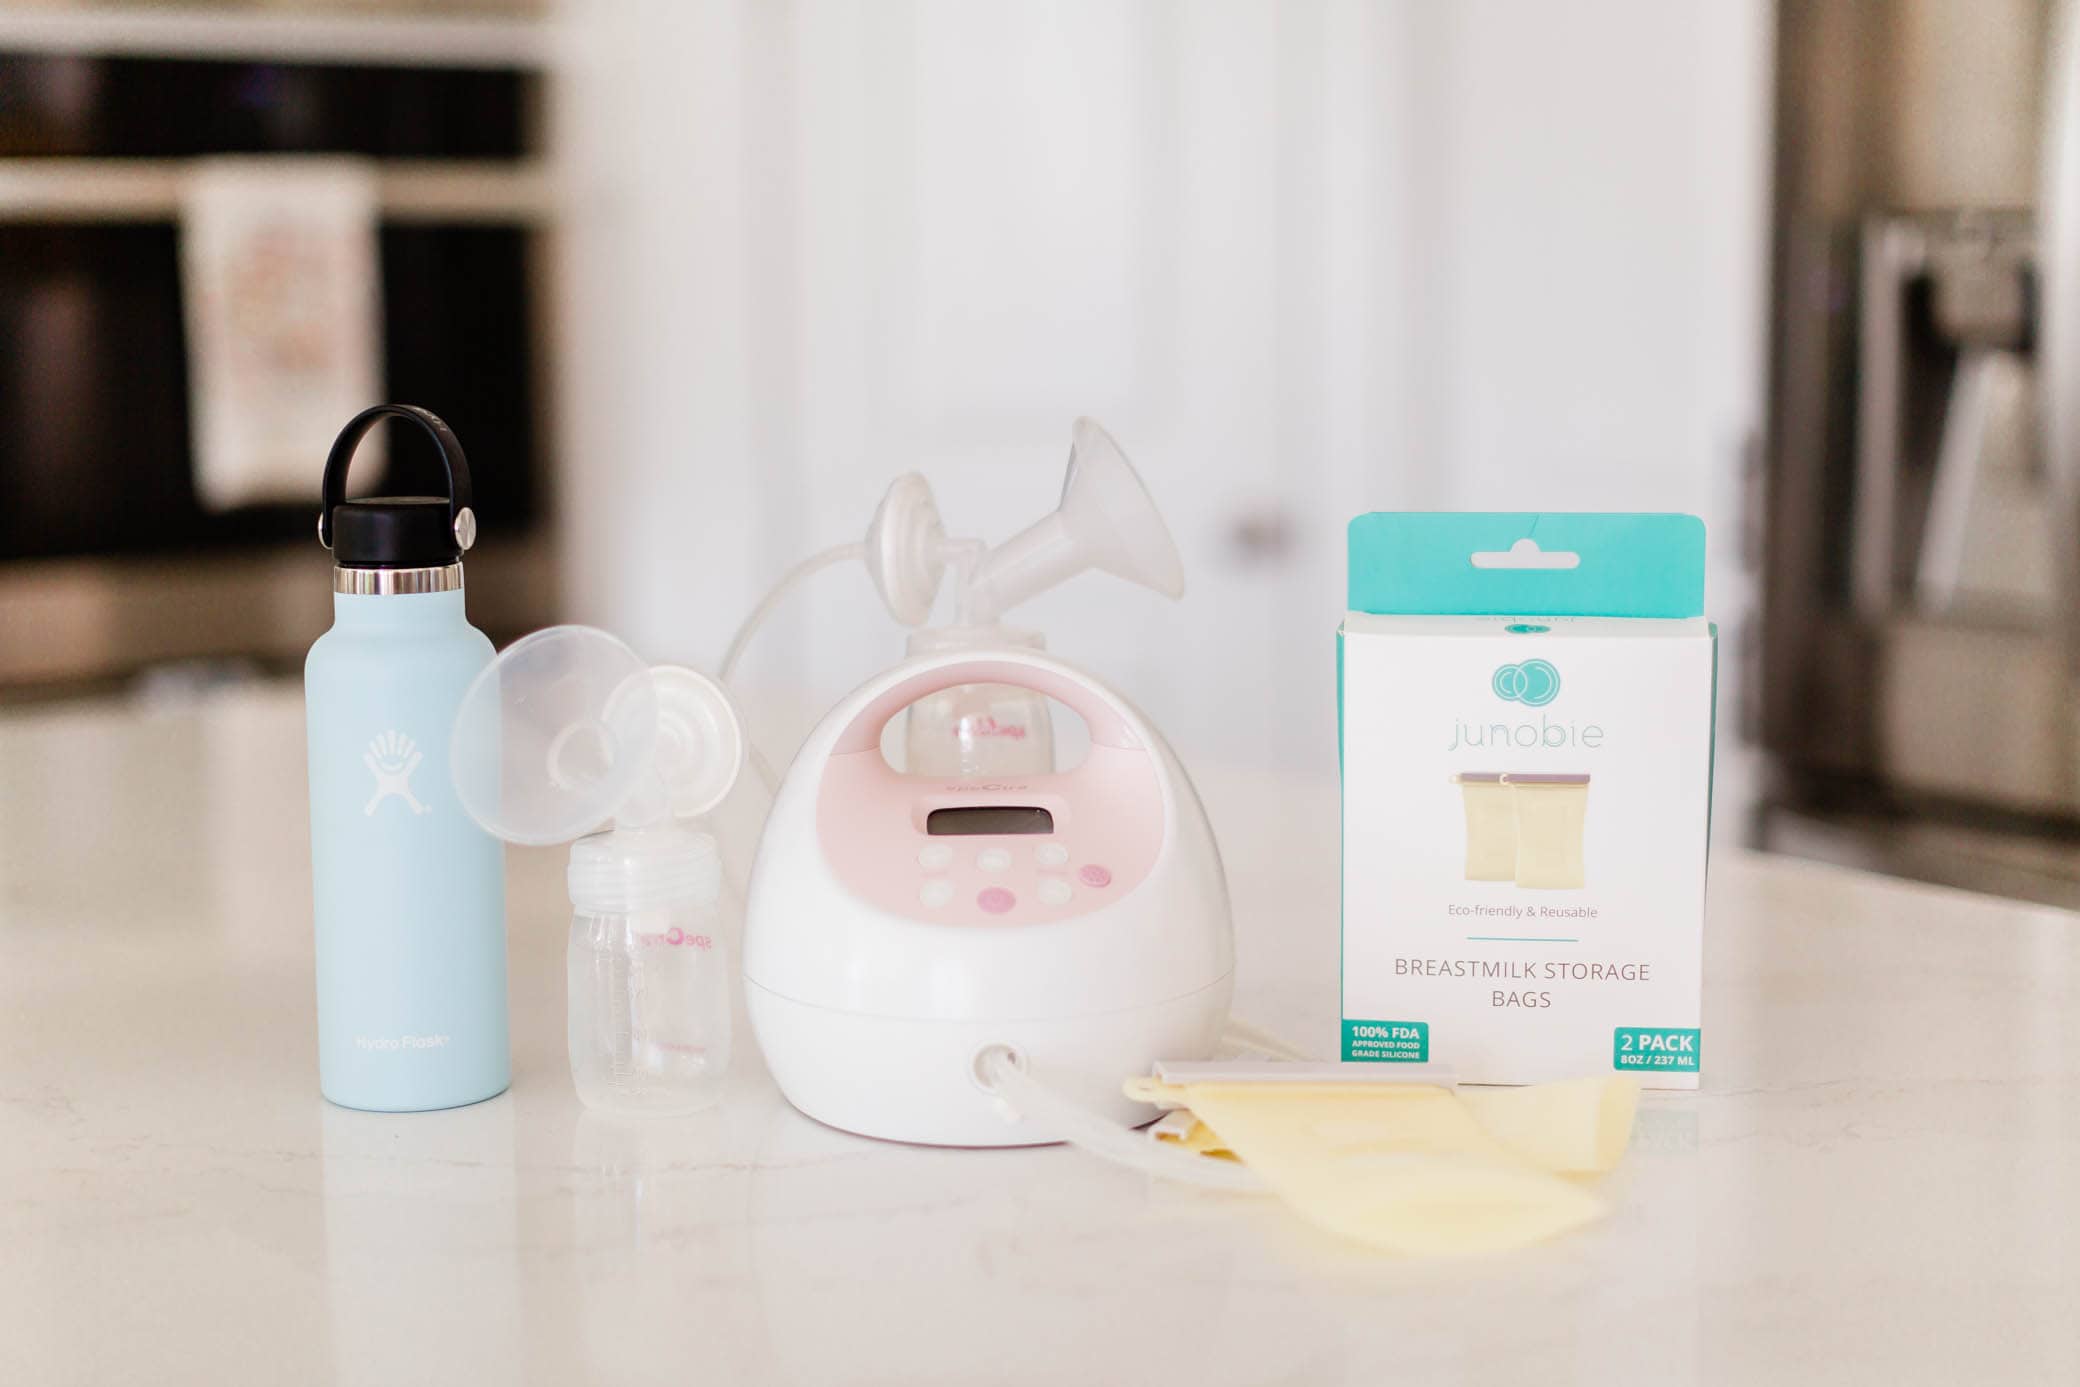 Breast pump, water bottle, and Junobie breastmilk storage bags on a kitchen counter